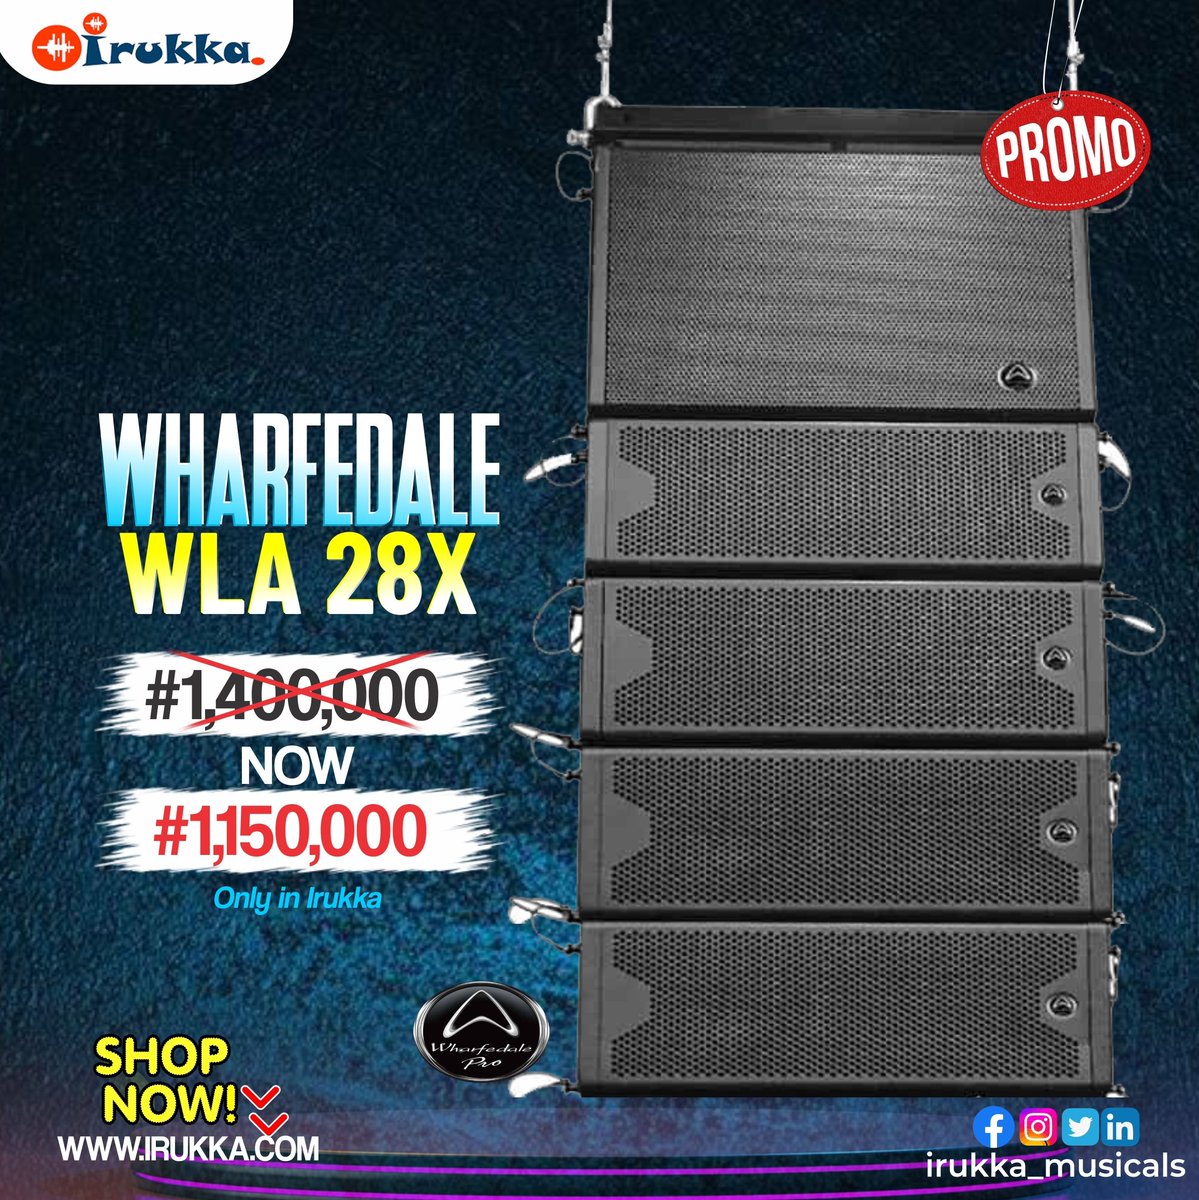 PROMO! PROMO!! PROMO!!! 💃

Don't wait till it's over, Grab yours Now!

With just ₦1,150,000 you can own a #Wharfedalepro #WLA28X #linearray #speaker excellent both for #rental, #concert touring and permanent #installations🚀😍

So don't sleep on this product!

#shopnow

#irukka